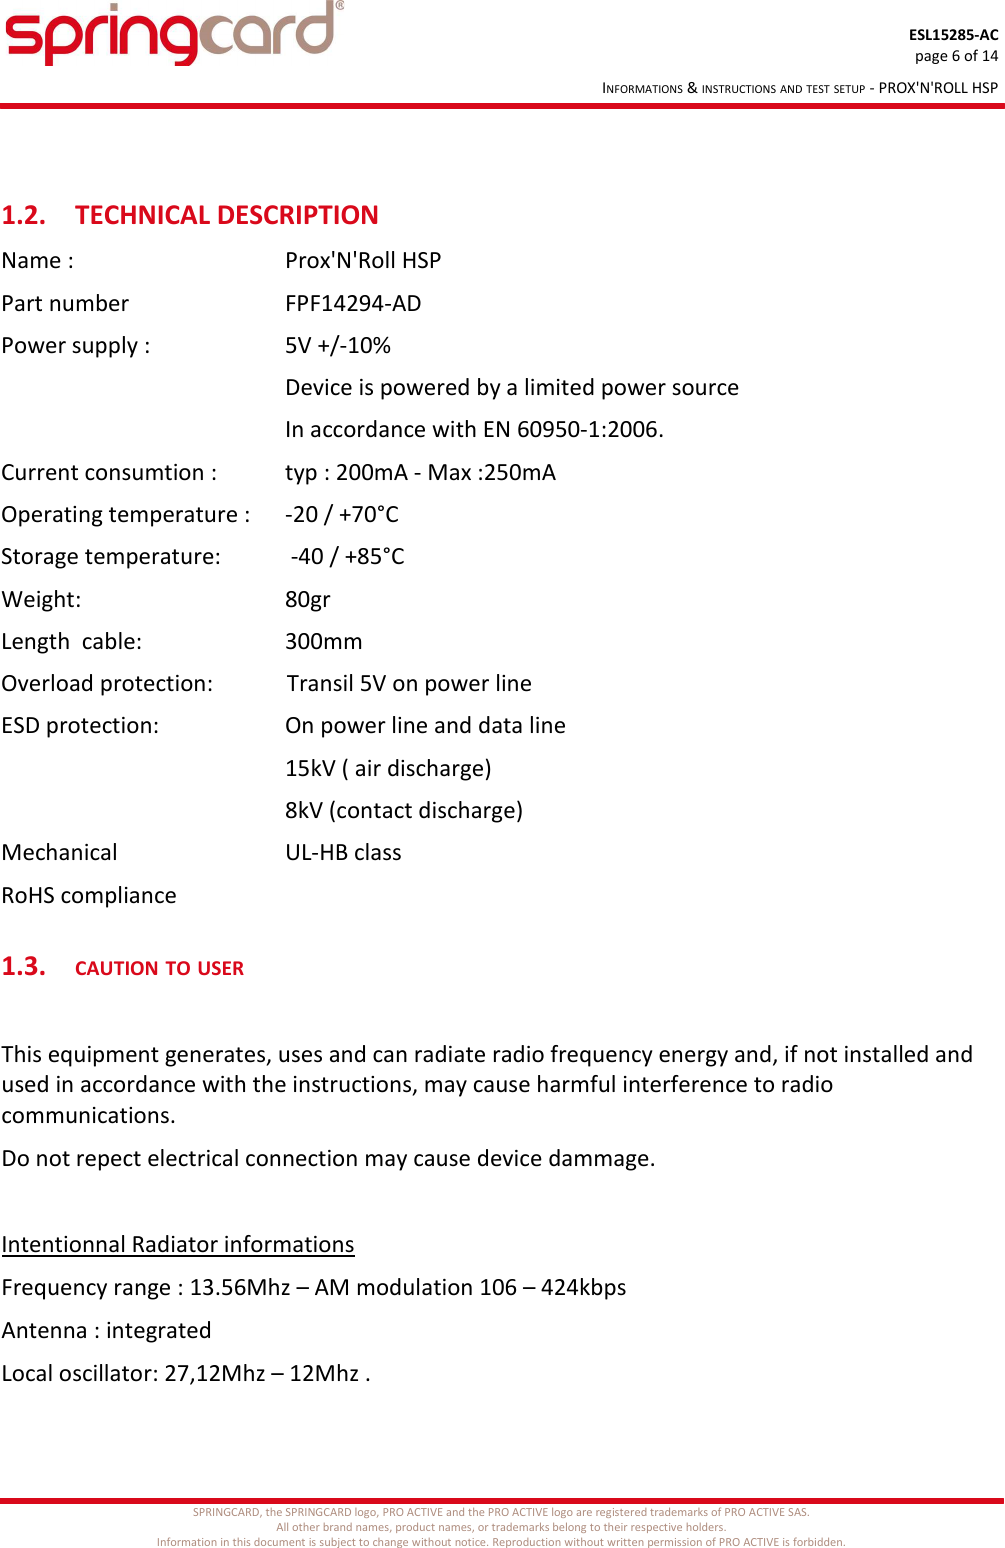 ESL15285-ACpage 6 of 14INFORMATIONS &amp; INSTRUCTIONS AND TEST SETUP - PROX&apos;N&apos;ROLL HSP1.2. TECHNICAL DESCRIPTIONName :  Prox&apos;N&apos;Roll HSPPart number FPF14294-ADPower supply :   5V +/-10%Device is powered by a limited power sourceIn accordance with EN 60950-1:2006.     Current consumtion : typ : 200mA - Max :250mAOperating temperature :  -20 / +70°CStorage temperature:  -40 / +85°C      Weight:   80grLength  cable:   300mmOverload protection:             Transil 5V on power line ESD protection: On power line and data line15kV ( air discharge)8kV (contact discharge)Mechanical  UL-HB classRoHS compliance1.3.CAUTION TO USERThis equipment generates, uses and can radiate radio frequency energy and, if not installed and used in accordance with the instructions, may cause harmful interference to radio communications.Do not repect electrical connection may cause device dammage.Intentionnal Radiator informationsFrequency range : 13.56Mhz – AM modulation 106 – 424kbpsAntenna : integratedLocal oscillator: 27,12Mhz – 12Mhz .SPRINGCARD, the SPRINGCARD logo, PRO ACTIVE and the PRO ACTIVE logo are registered trademarks of PRO ACTIVE SAS.All other brand names, product names, or trademarks belong to their respective holders.Information in this document is subject to change without notice. Reproduction without written permission of PRO ACTIVE is forbidden.